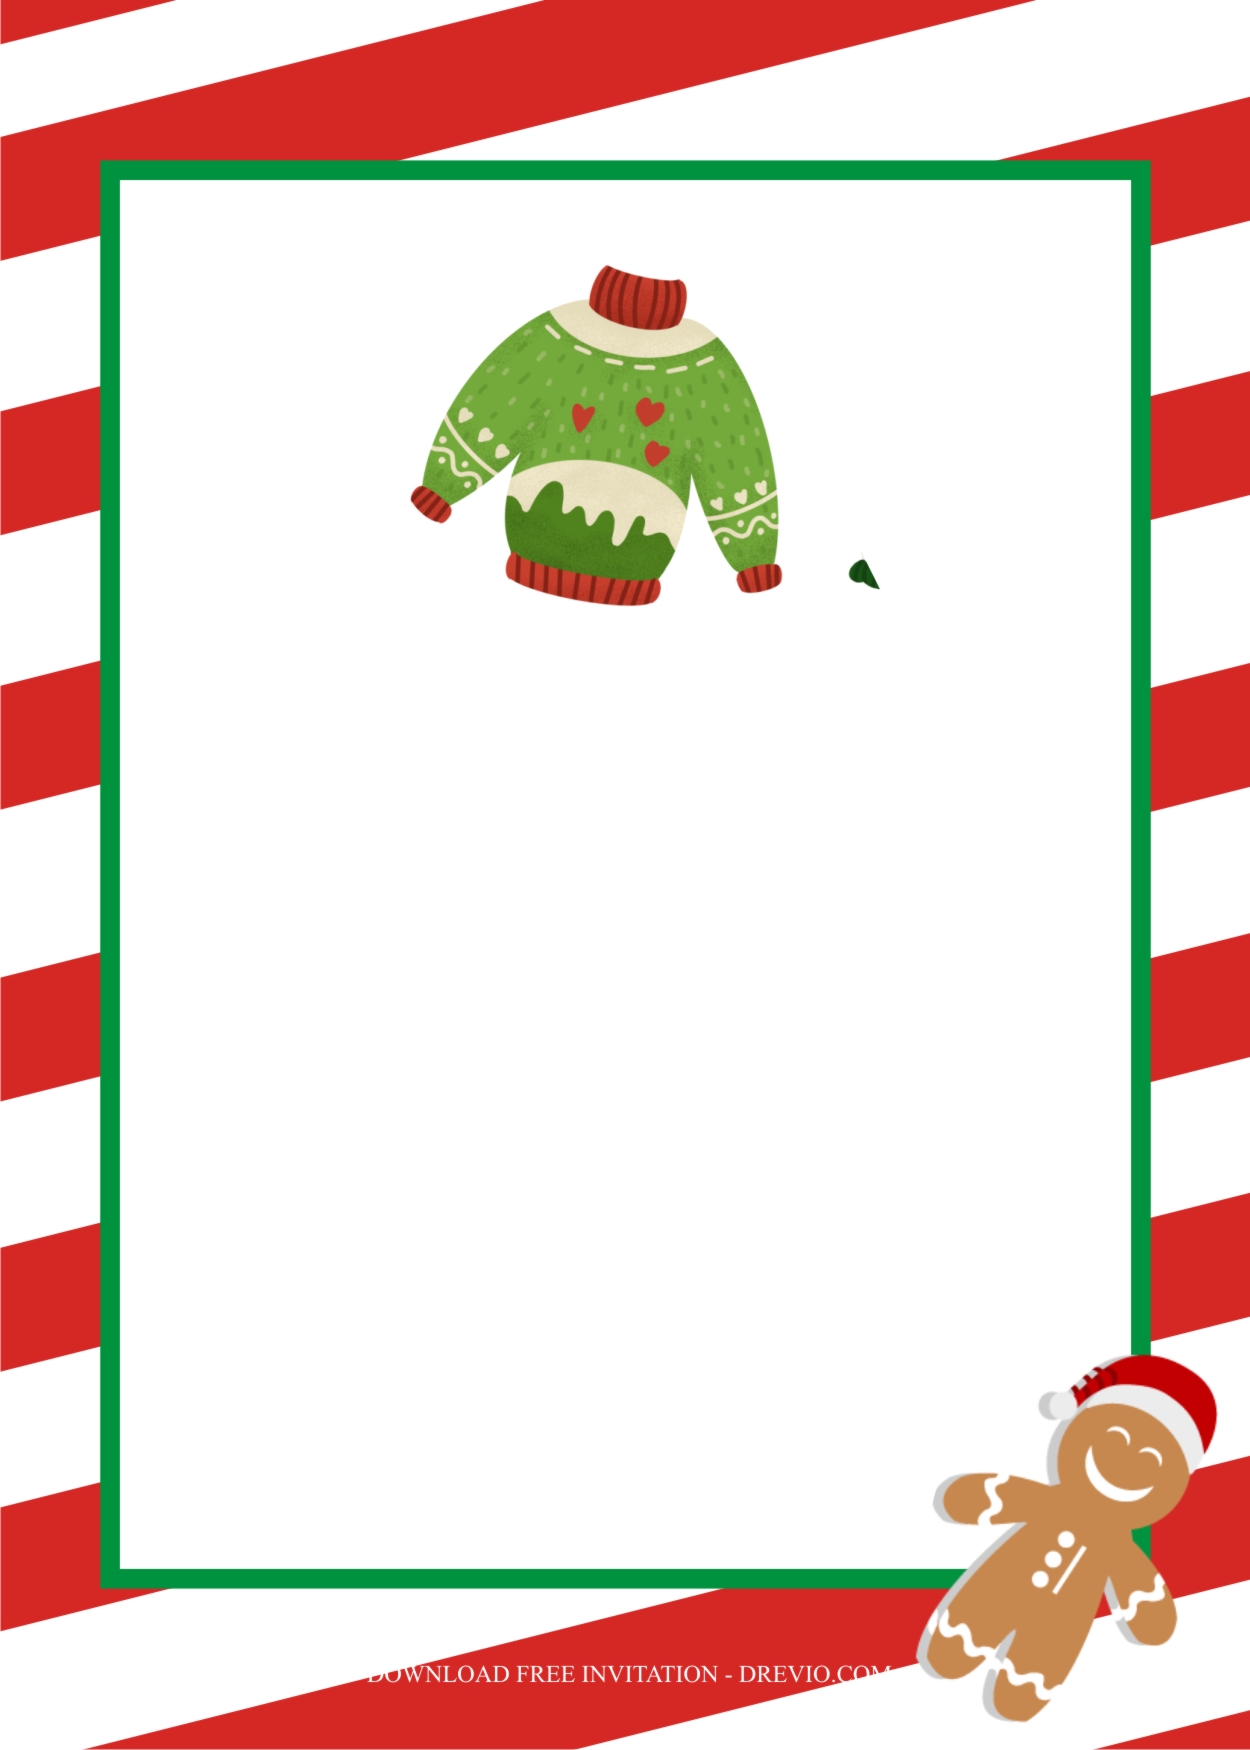 ugly-christmas-sweater-invitation-template3-download-hundreds-free